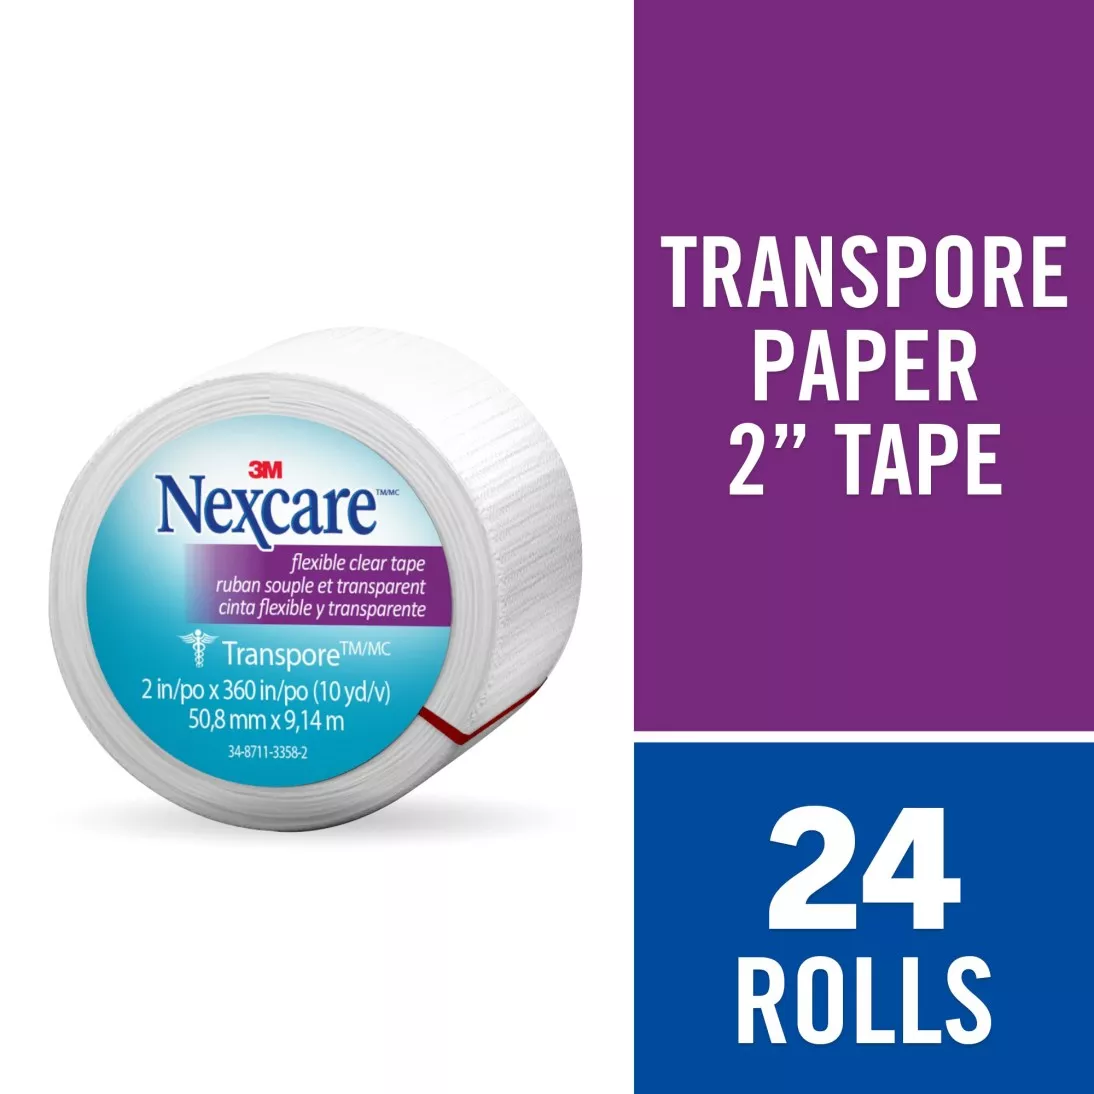 Nexcare™ Transpore™ Flexible Clear First Aid Tape 527-P2, 2 in x 10 yds,
Wrapped